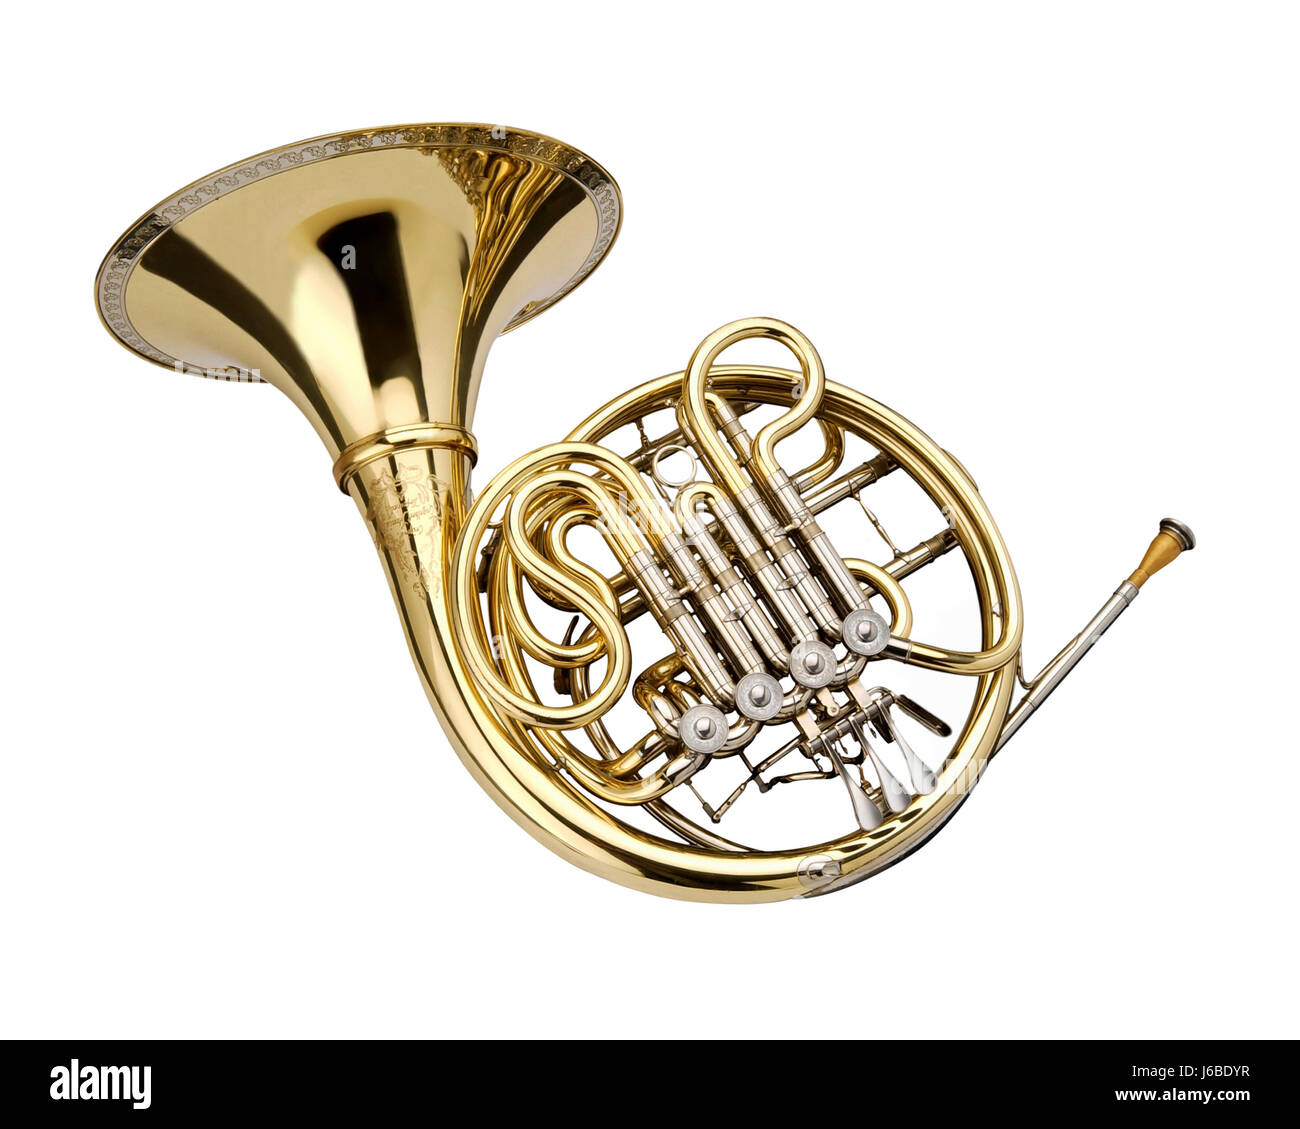 horn metal jazz orchestra bronze band music group gold art horn metal note Stock Photo